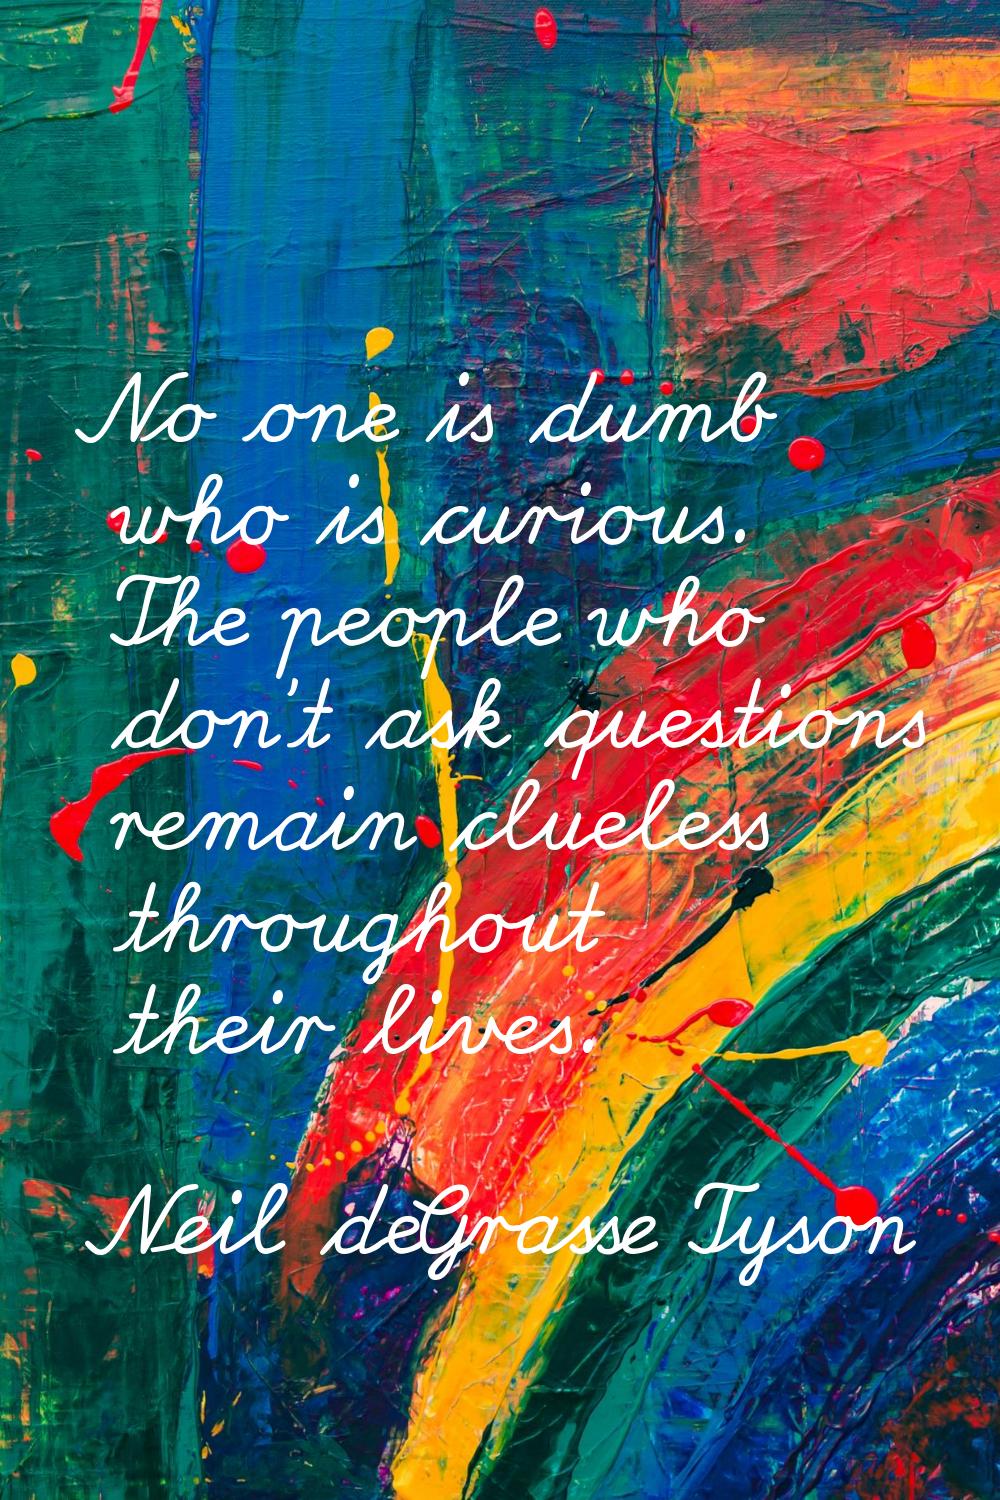 No one is dumb who is curious. The people who don't ask questions remain clueless throughout their 